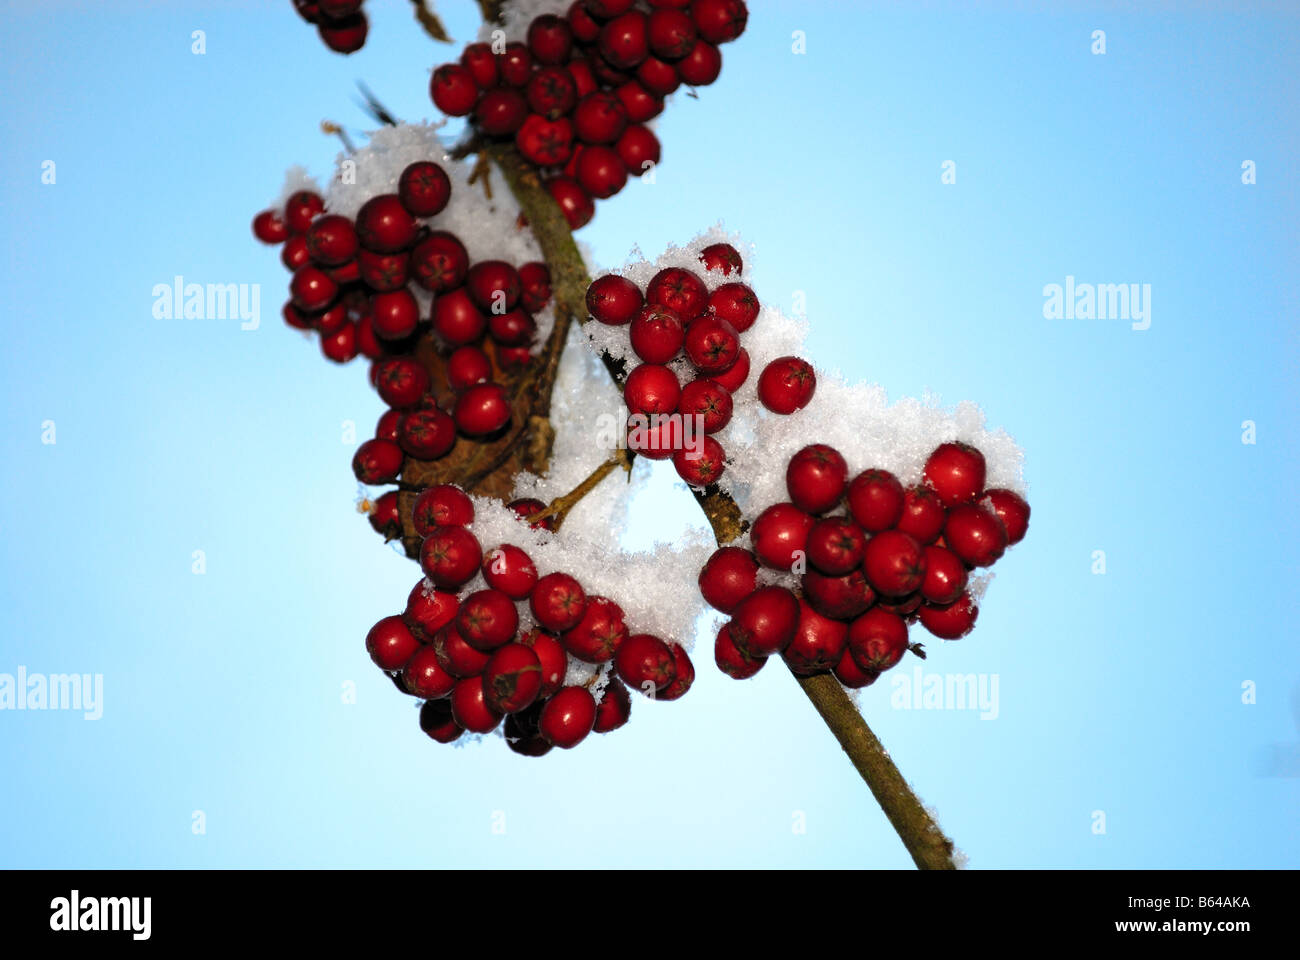 Cotoneaster berries in the snow, Fife, Scotland Stock Photo